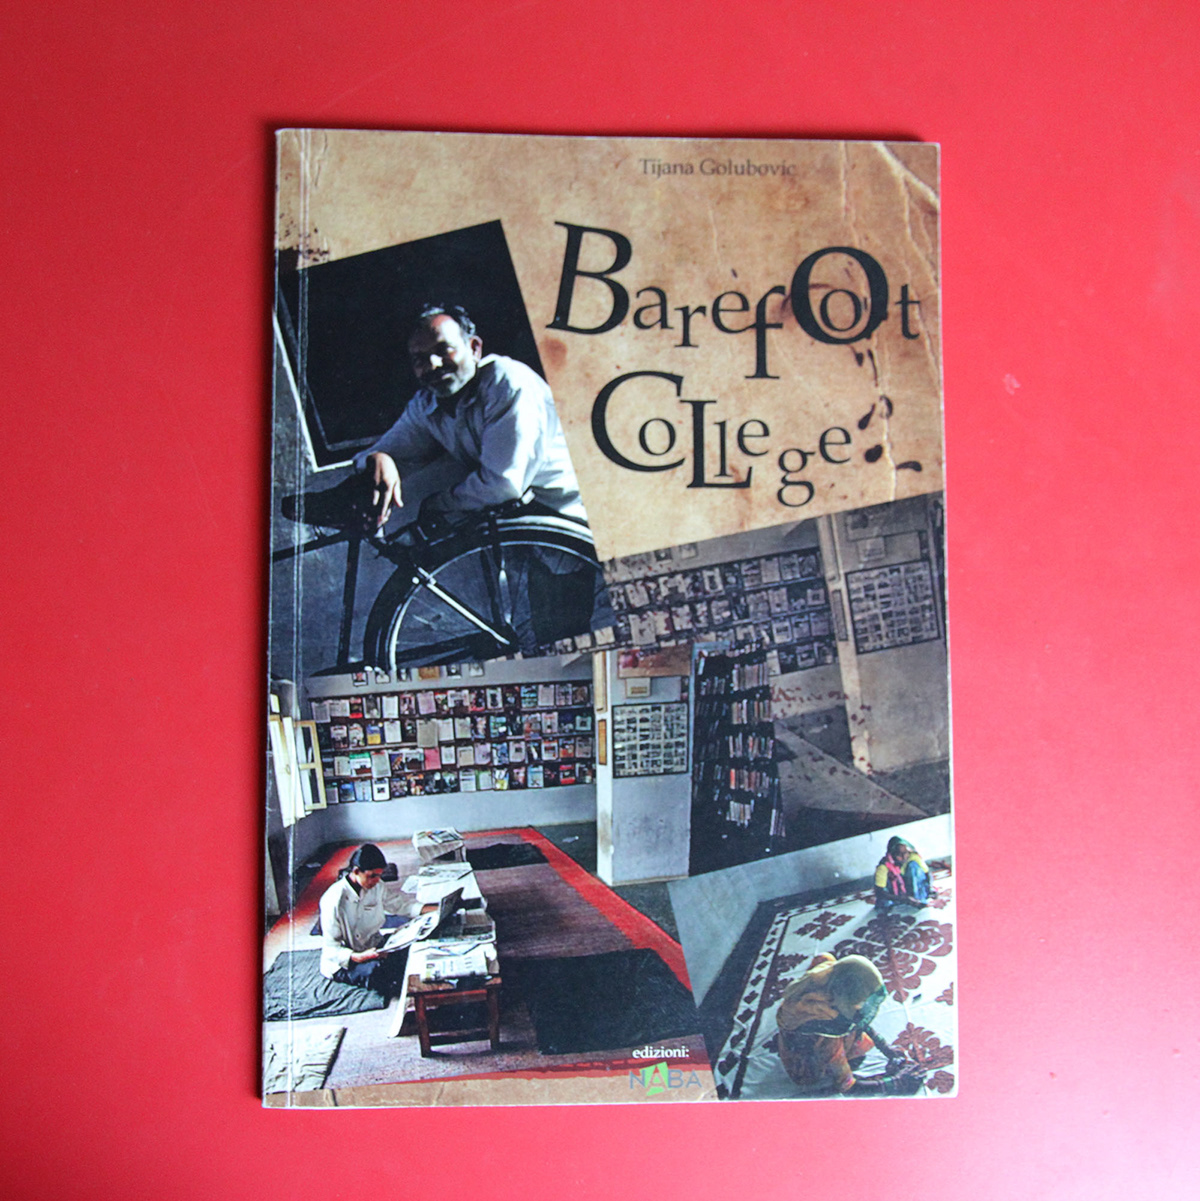 Barefoot Collage book